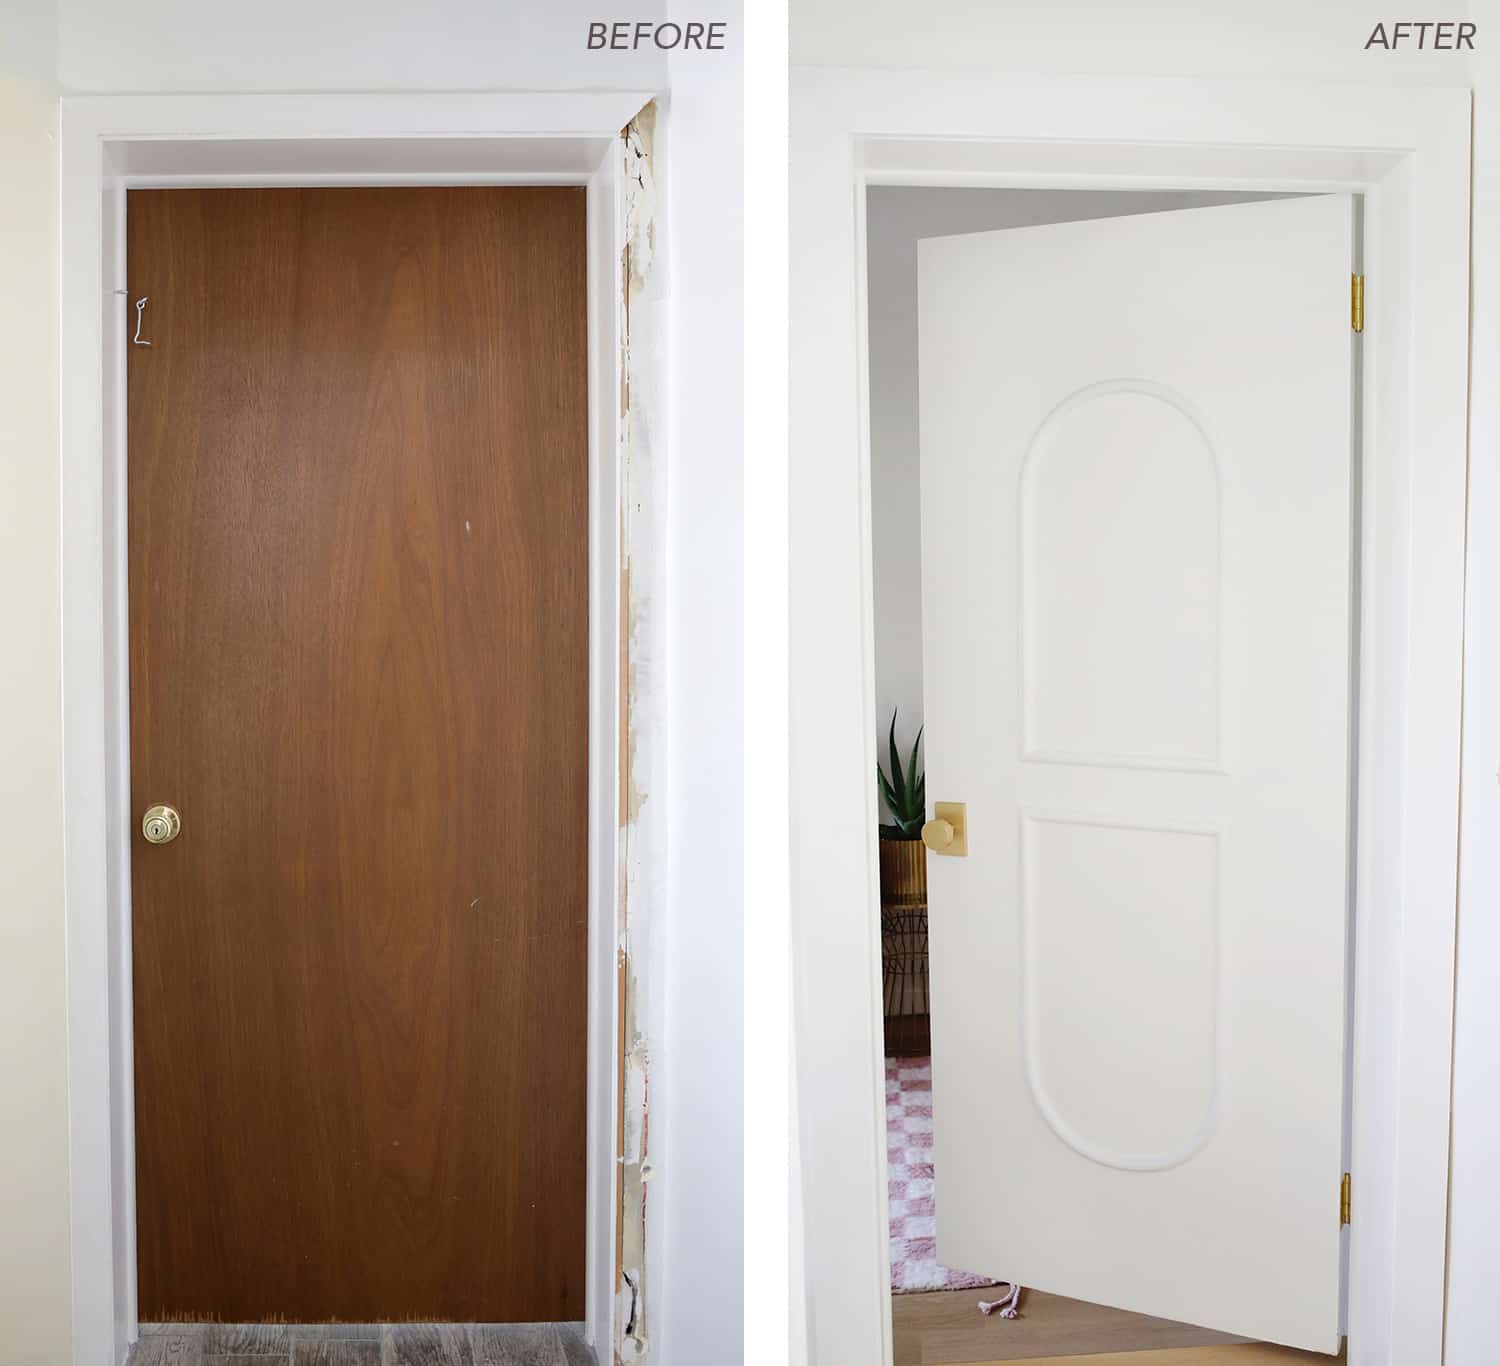 Before and after versions of the brown door painted white with new hardware